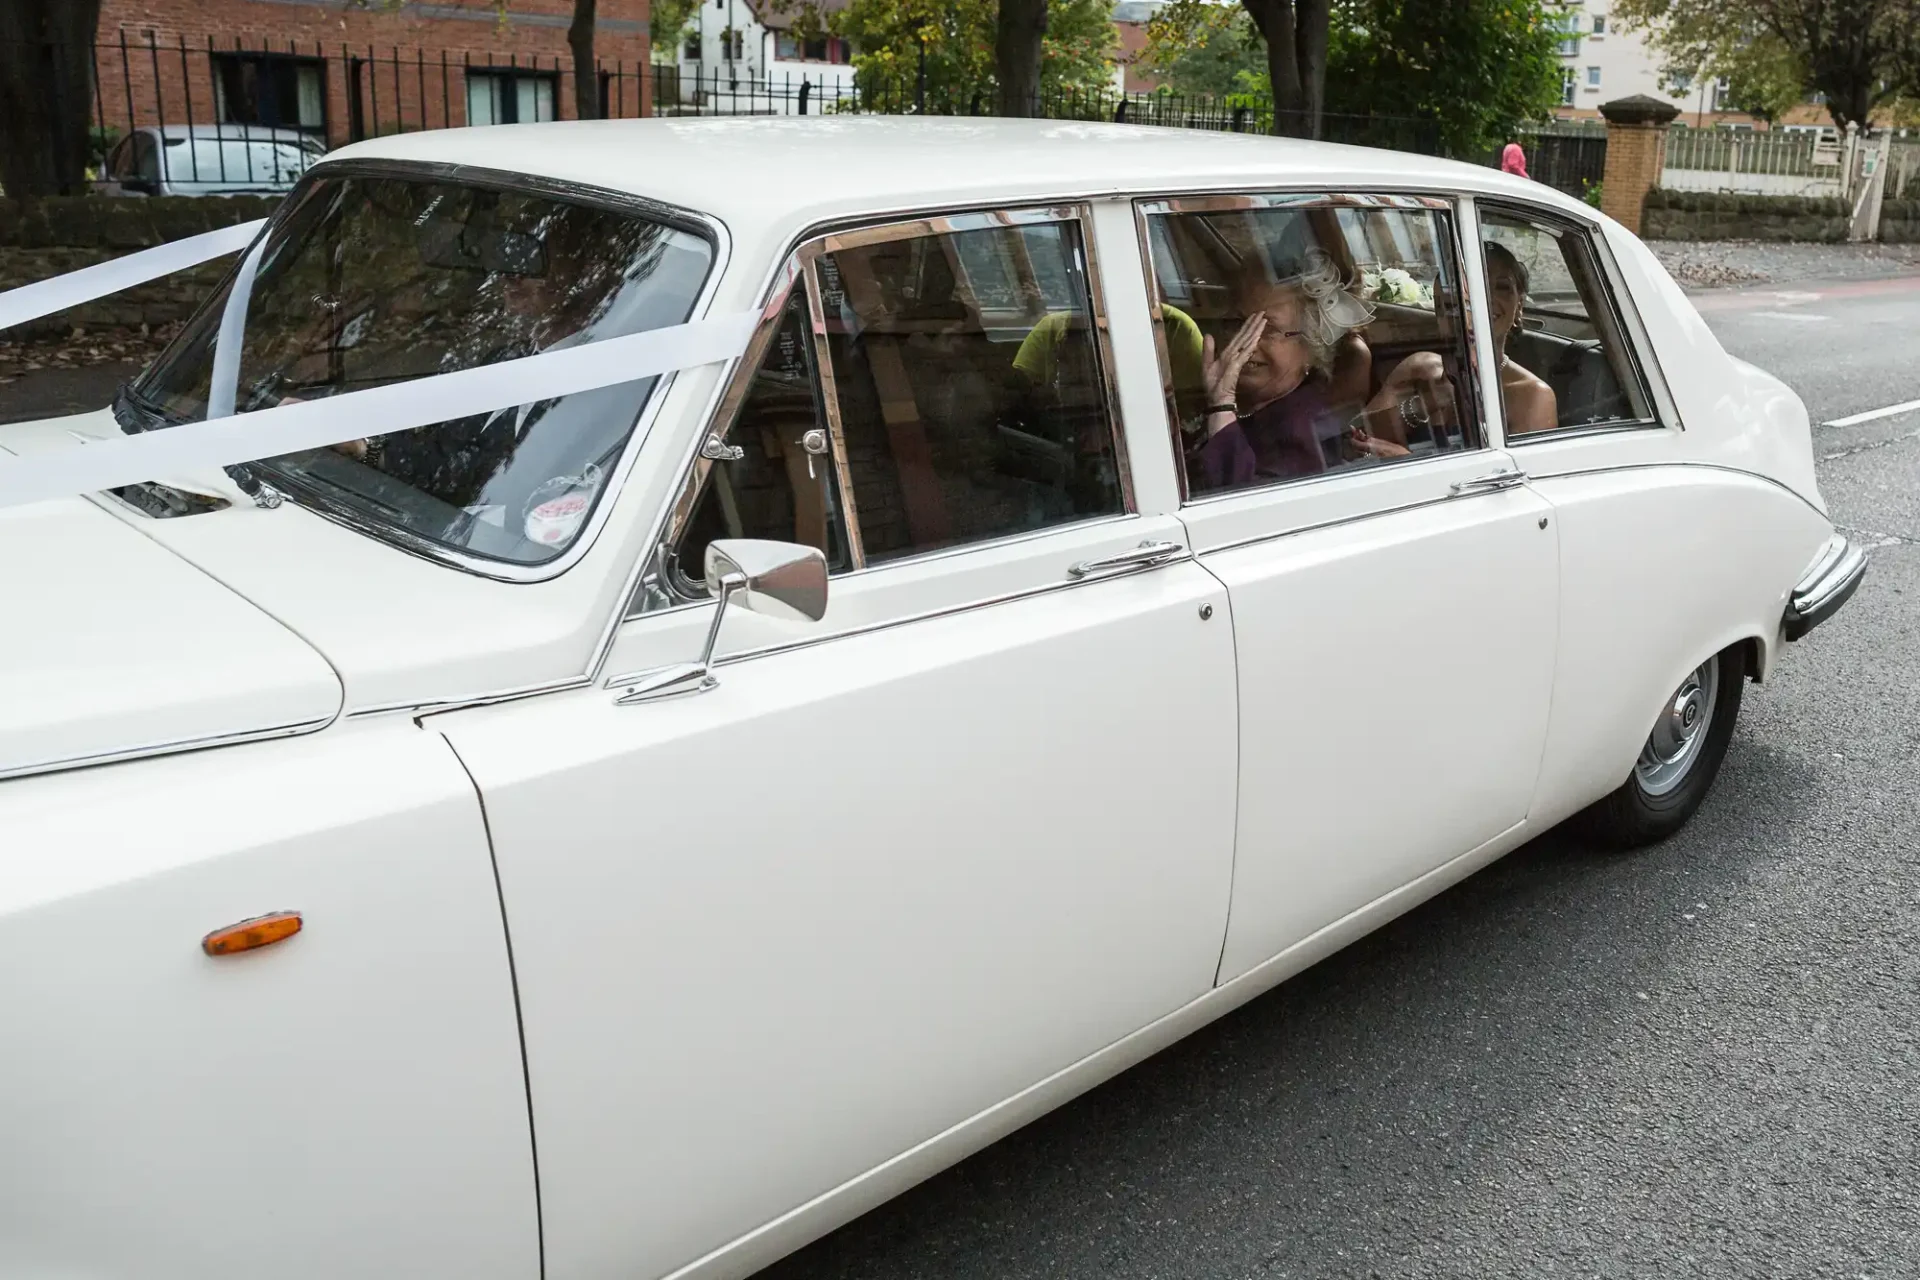 White wedding limousine with ribbons, carrying passengers visible through the windows, parked on a tree-lined street.